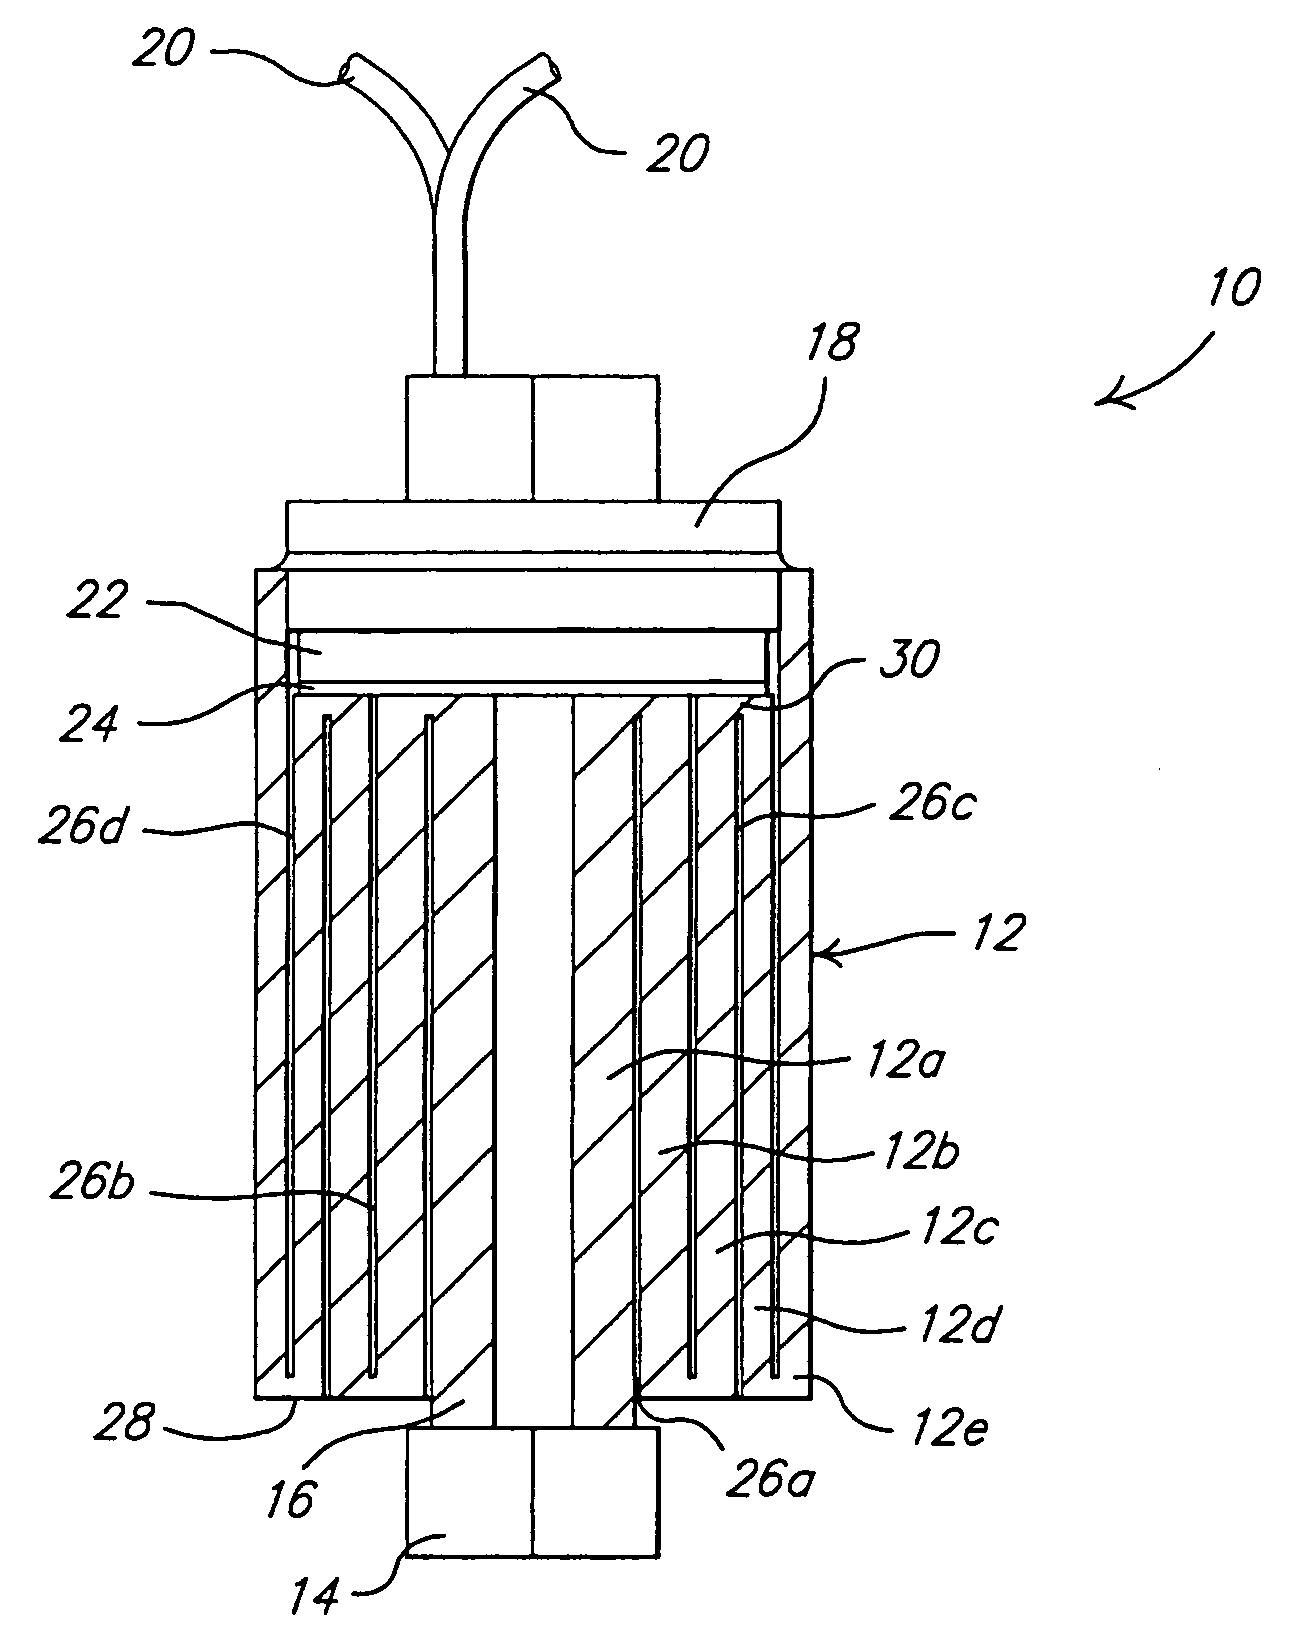 Concentric tube shape memory alloy actuator apparatus and method